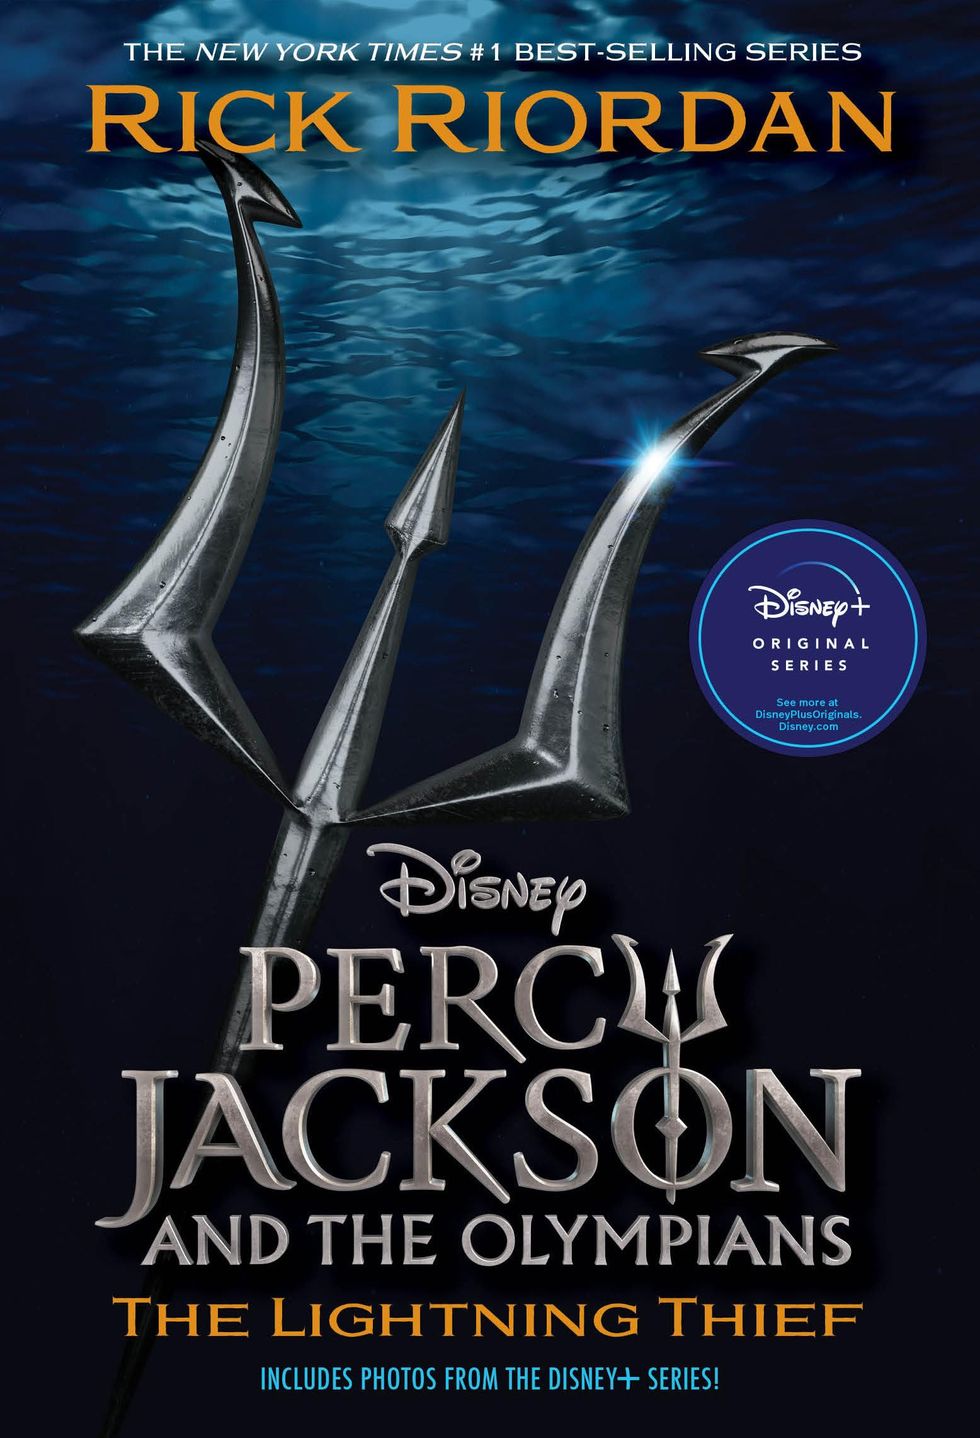 Percy Jackson and the Olympians, E-book One: Lightning Thief Disney+ Tie in Model (Percy Jackson & the Olympians)